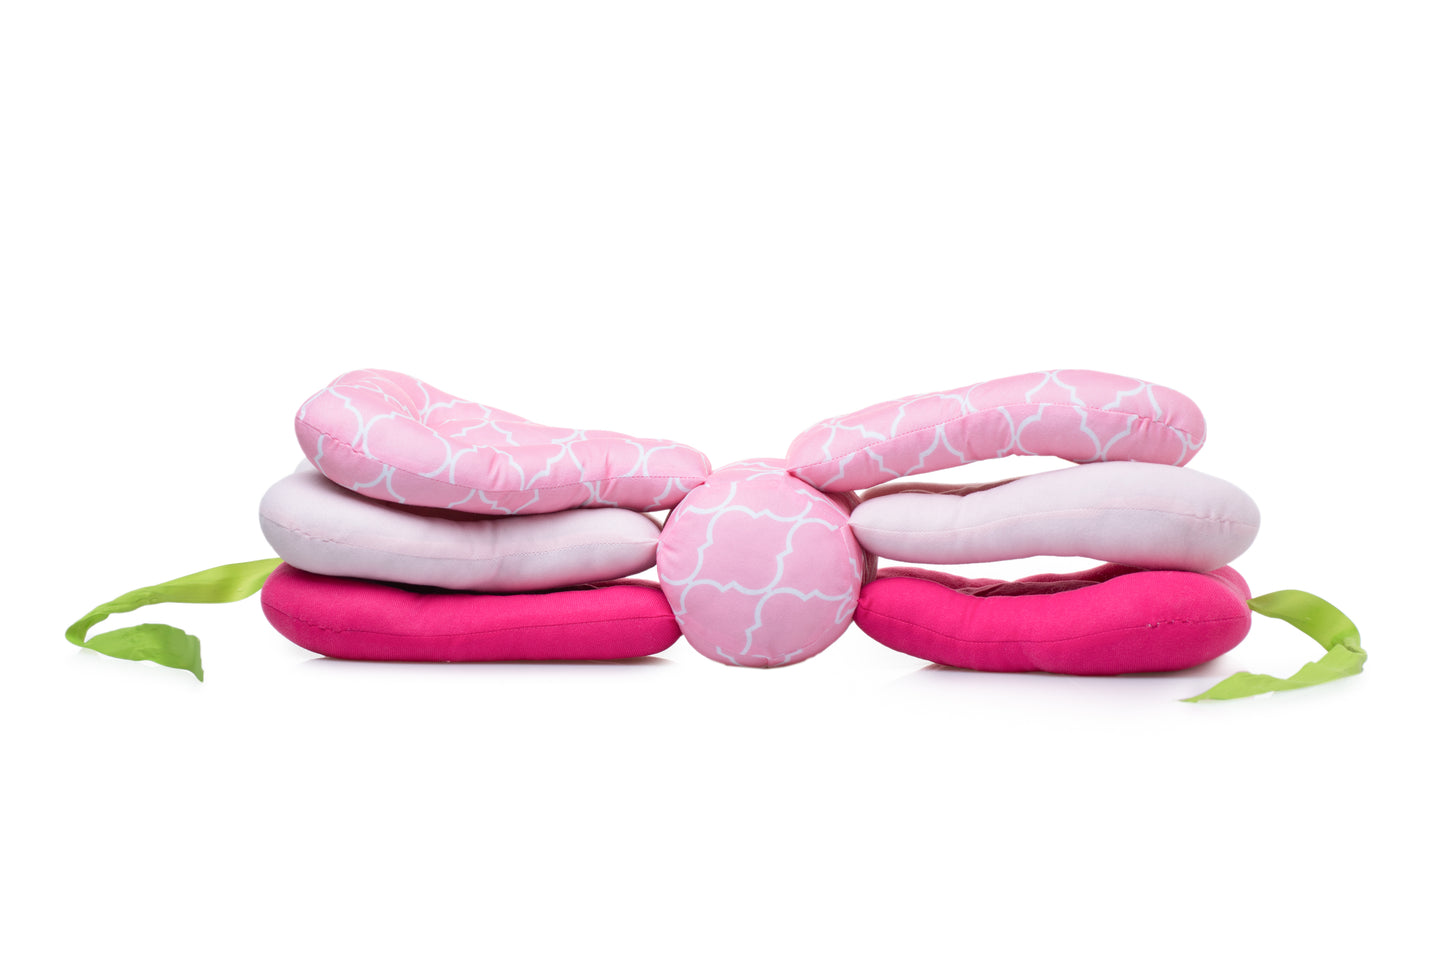 Each-pillow-is-adjustable-for-optimal-positioning-during-breastfeeding